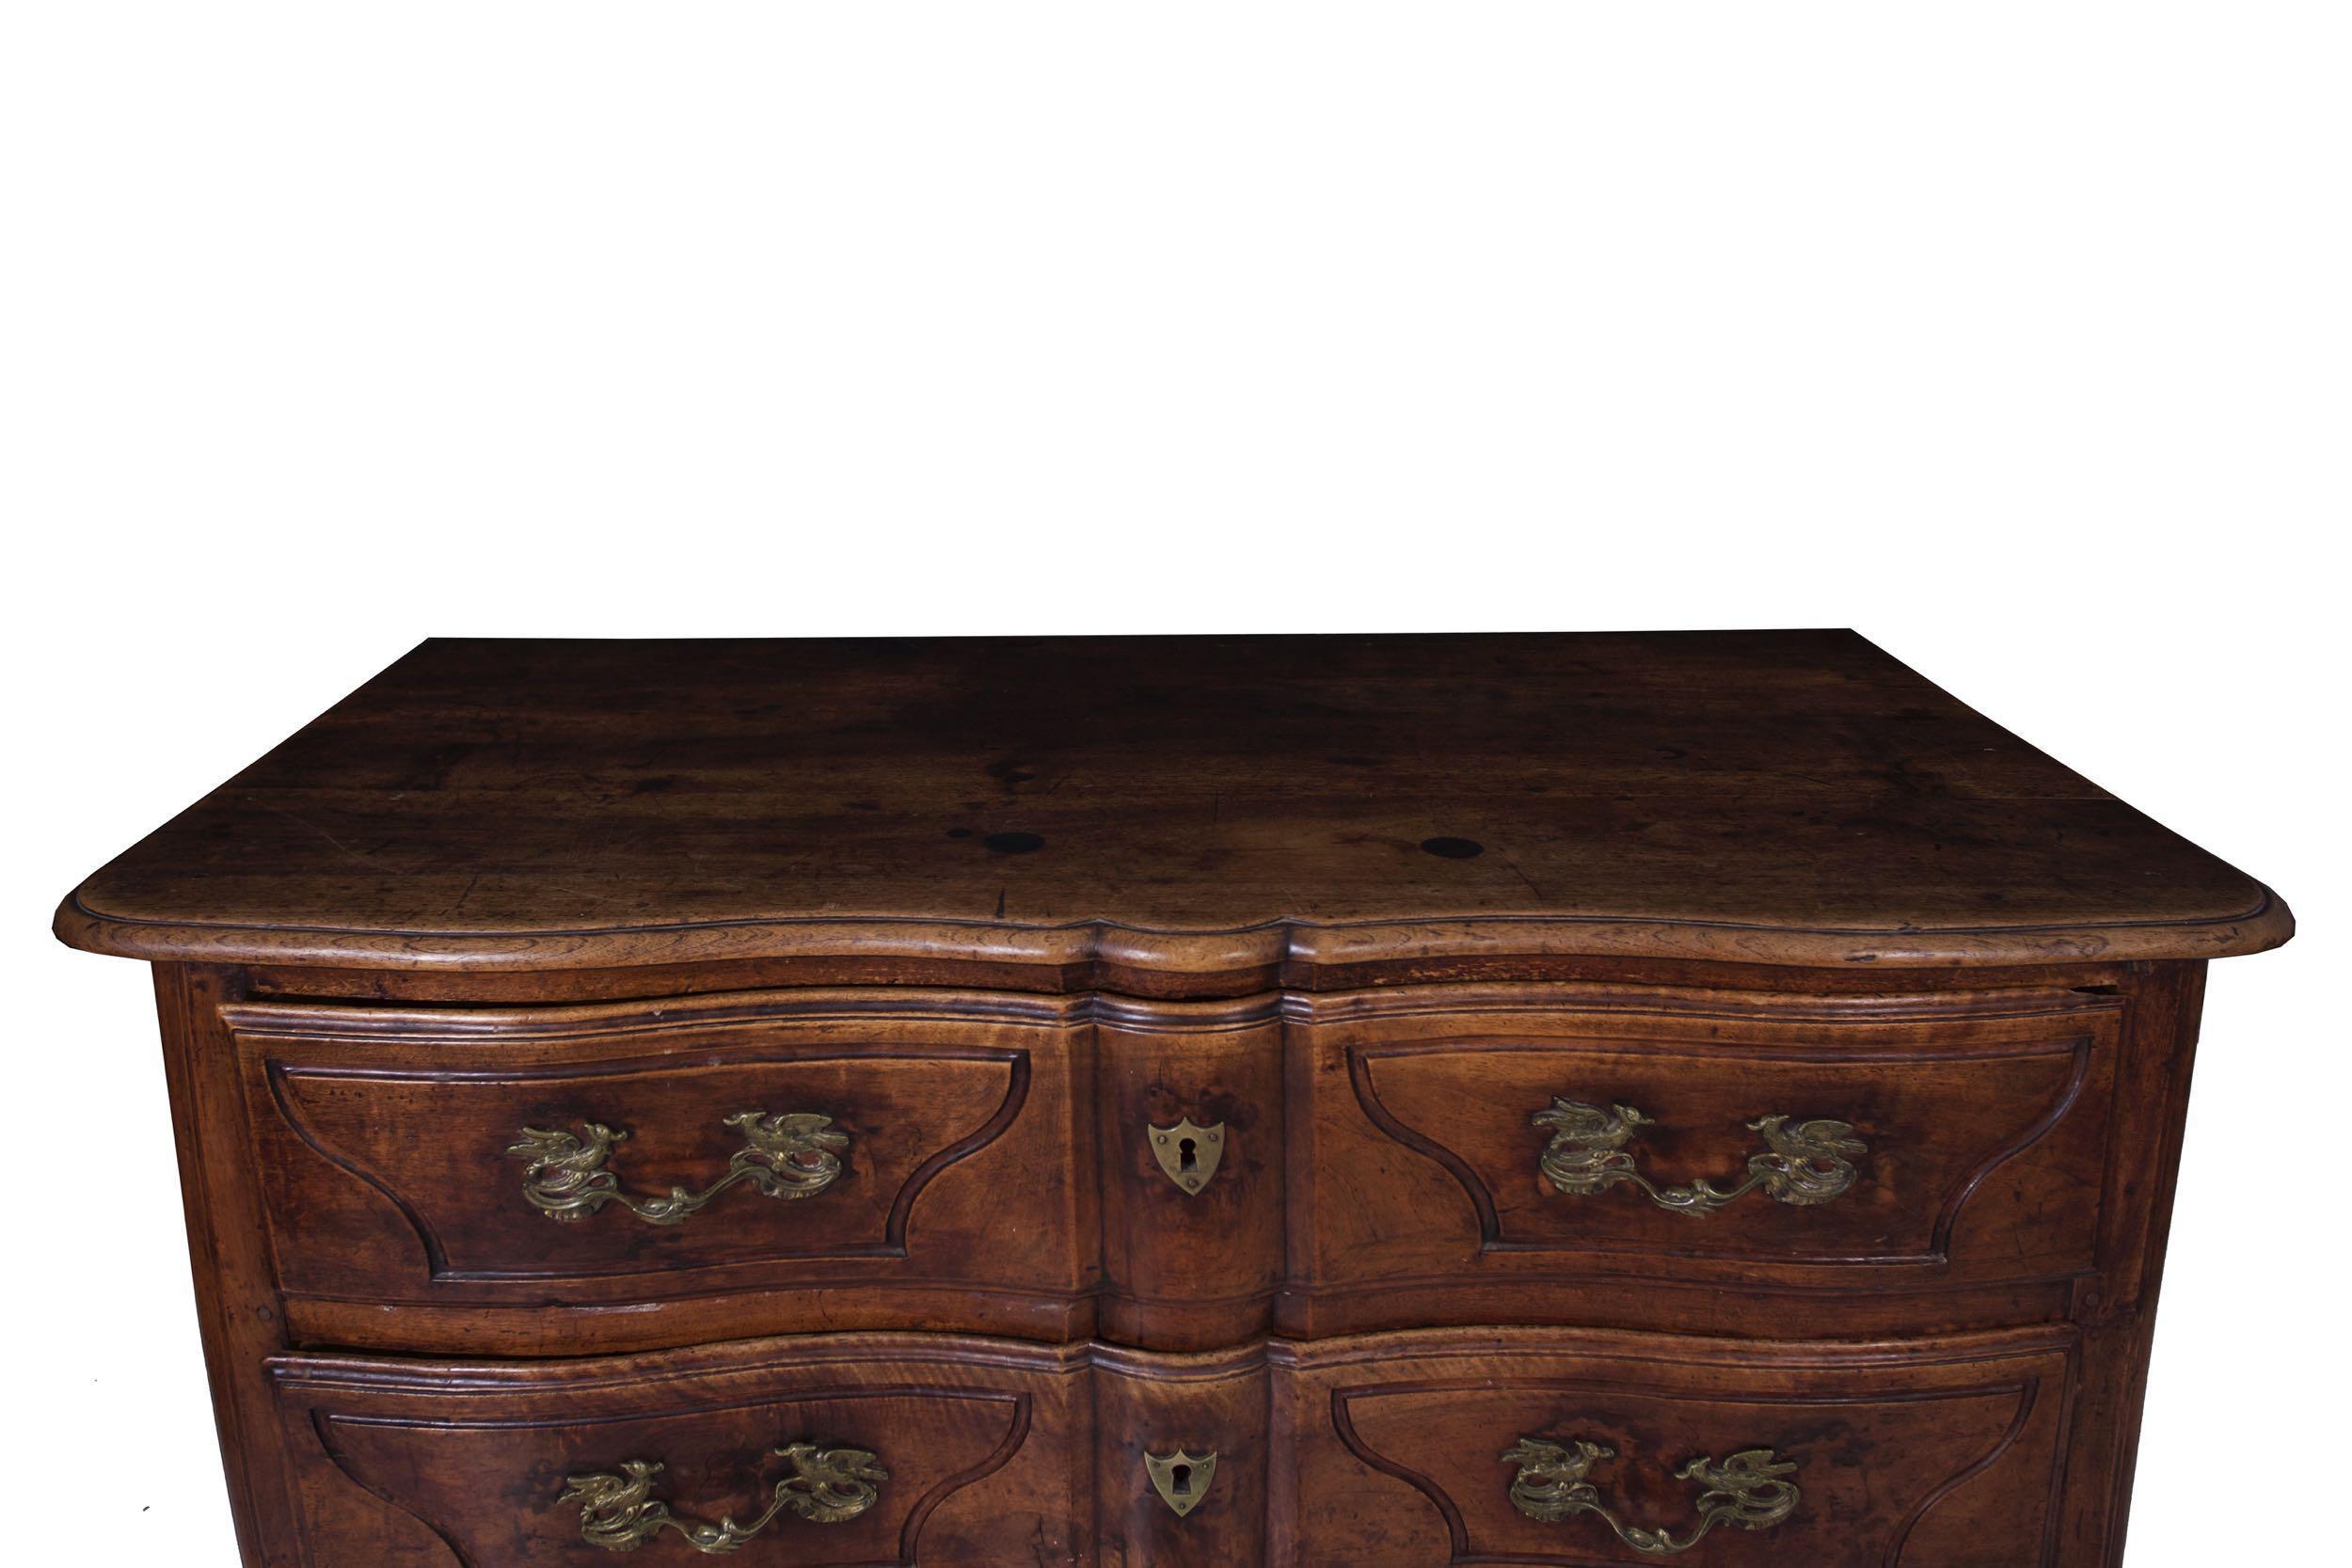 18th Century Regencé Period Walnut Commode Chest of Drawers, circa 1730-1750 For Sale 1